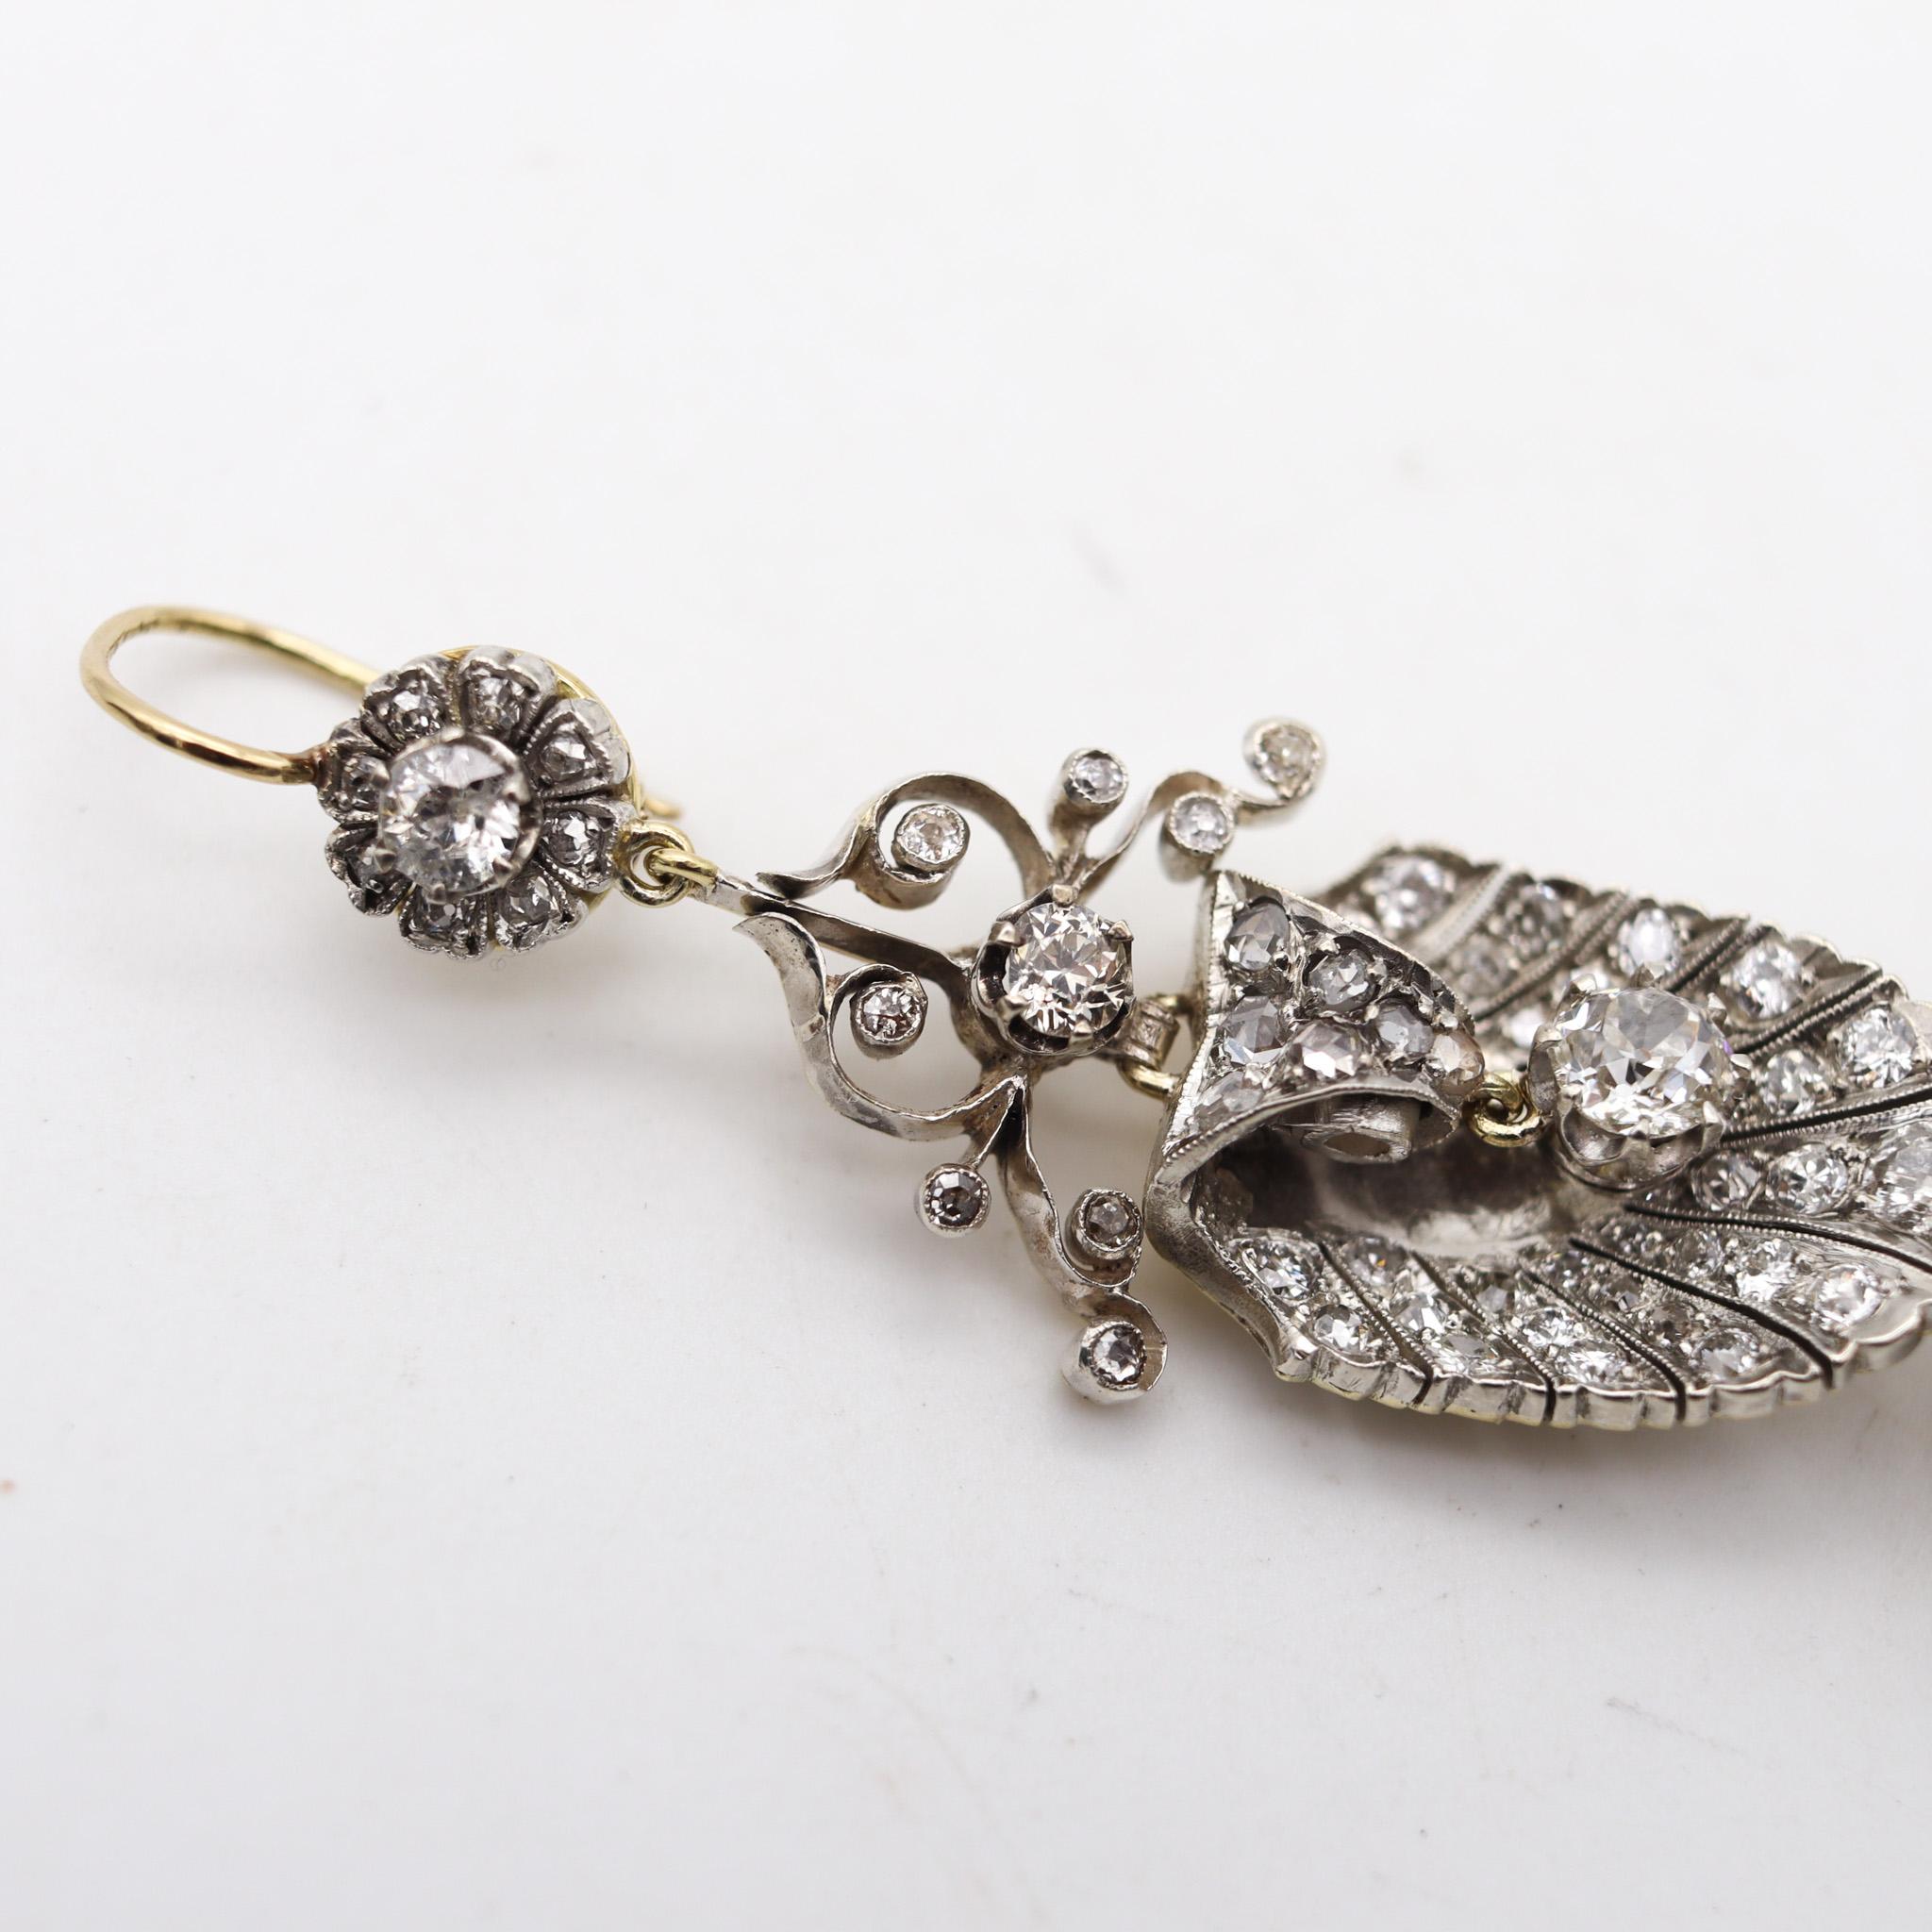 Georgian 1800 Antique Dangle Earrings In 15Kt Gold With 8.46 Ctw In Diamonds In Excellent Condition For Sale In Miami, FL